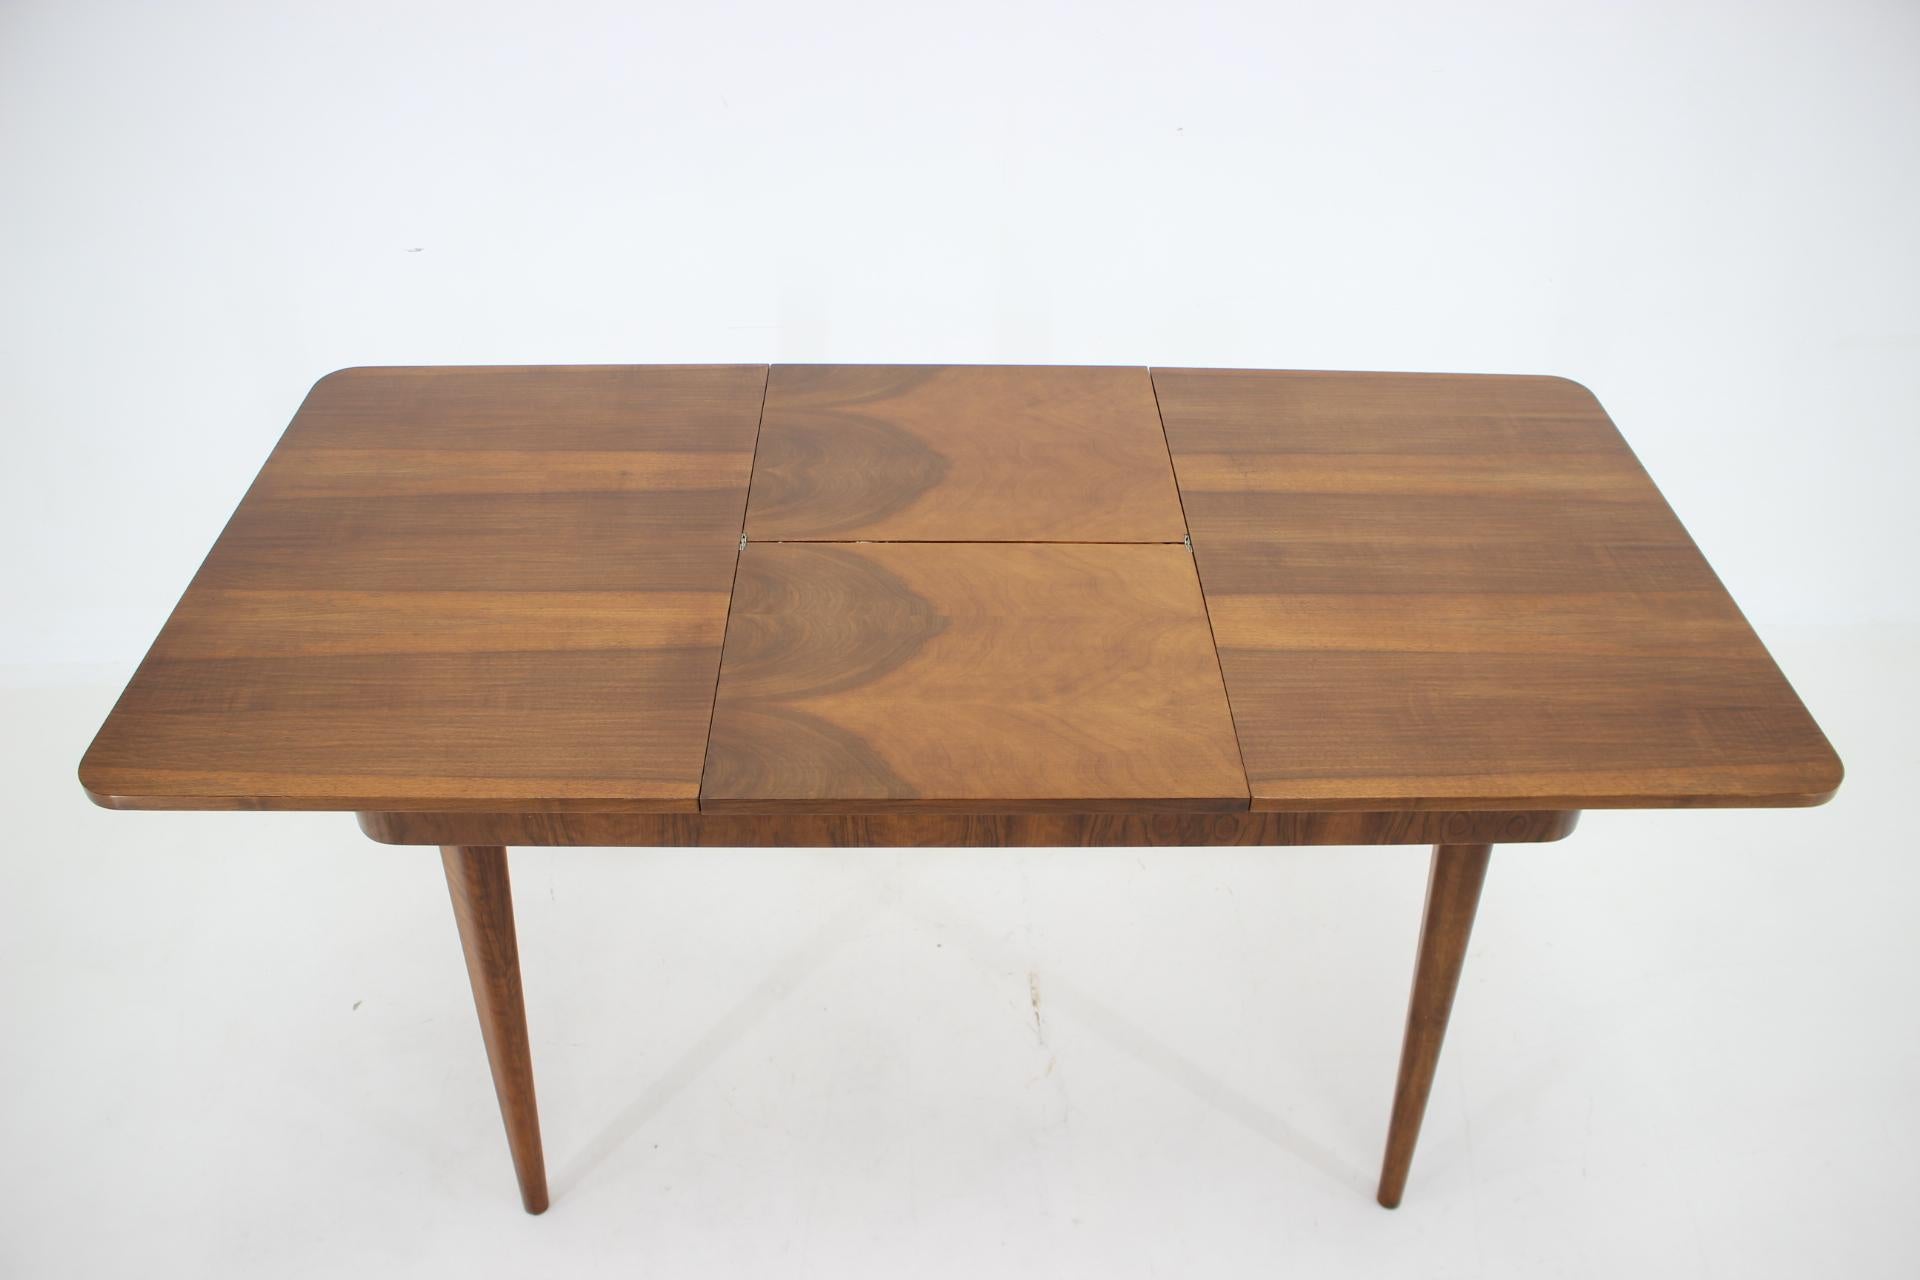 1950s Extendable Dining Table in Walnut by UP zavody, Czechoslovakia For Sale 5